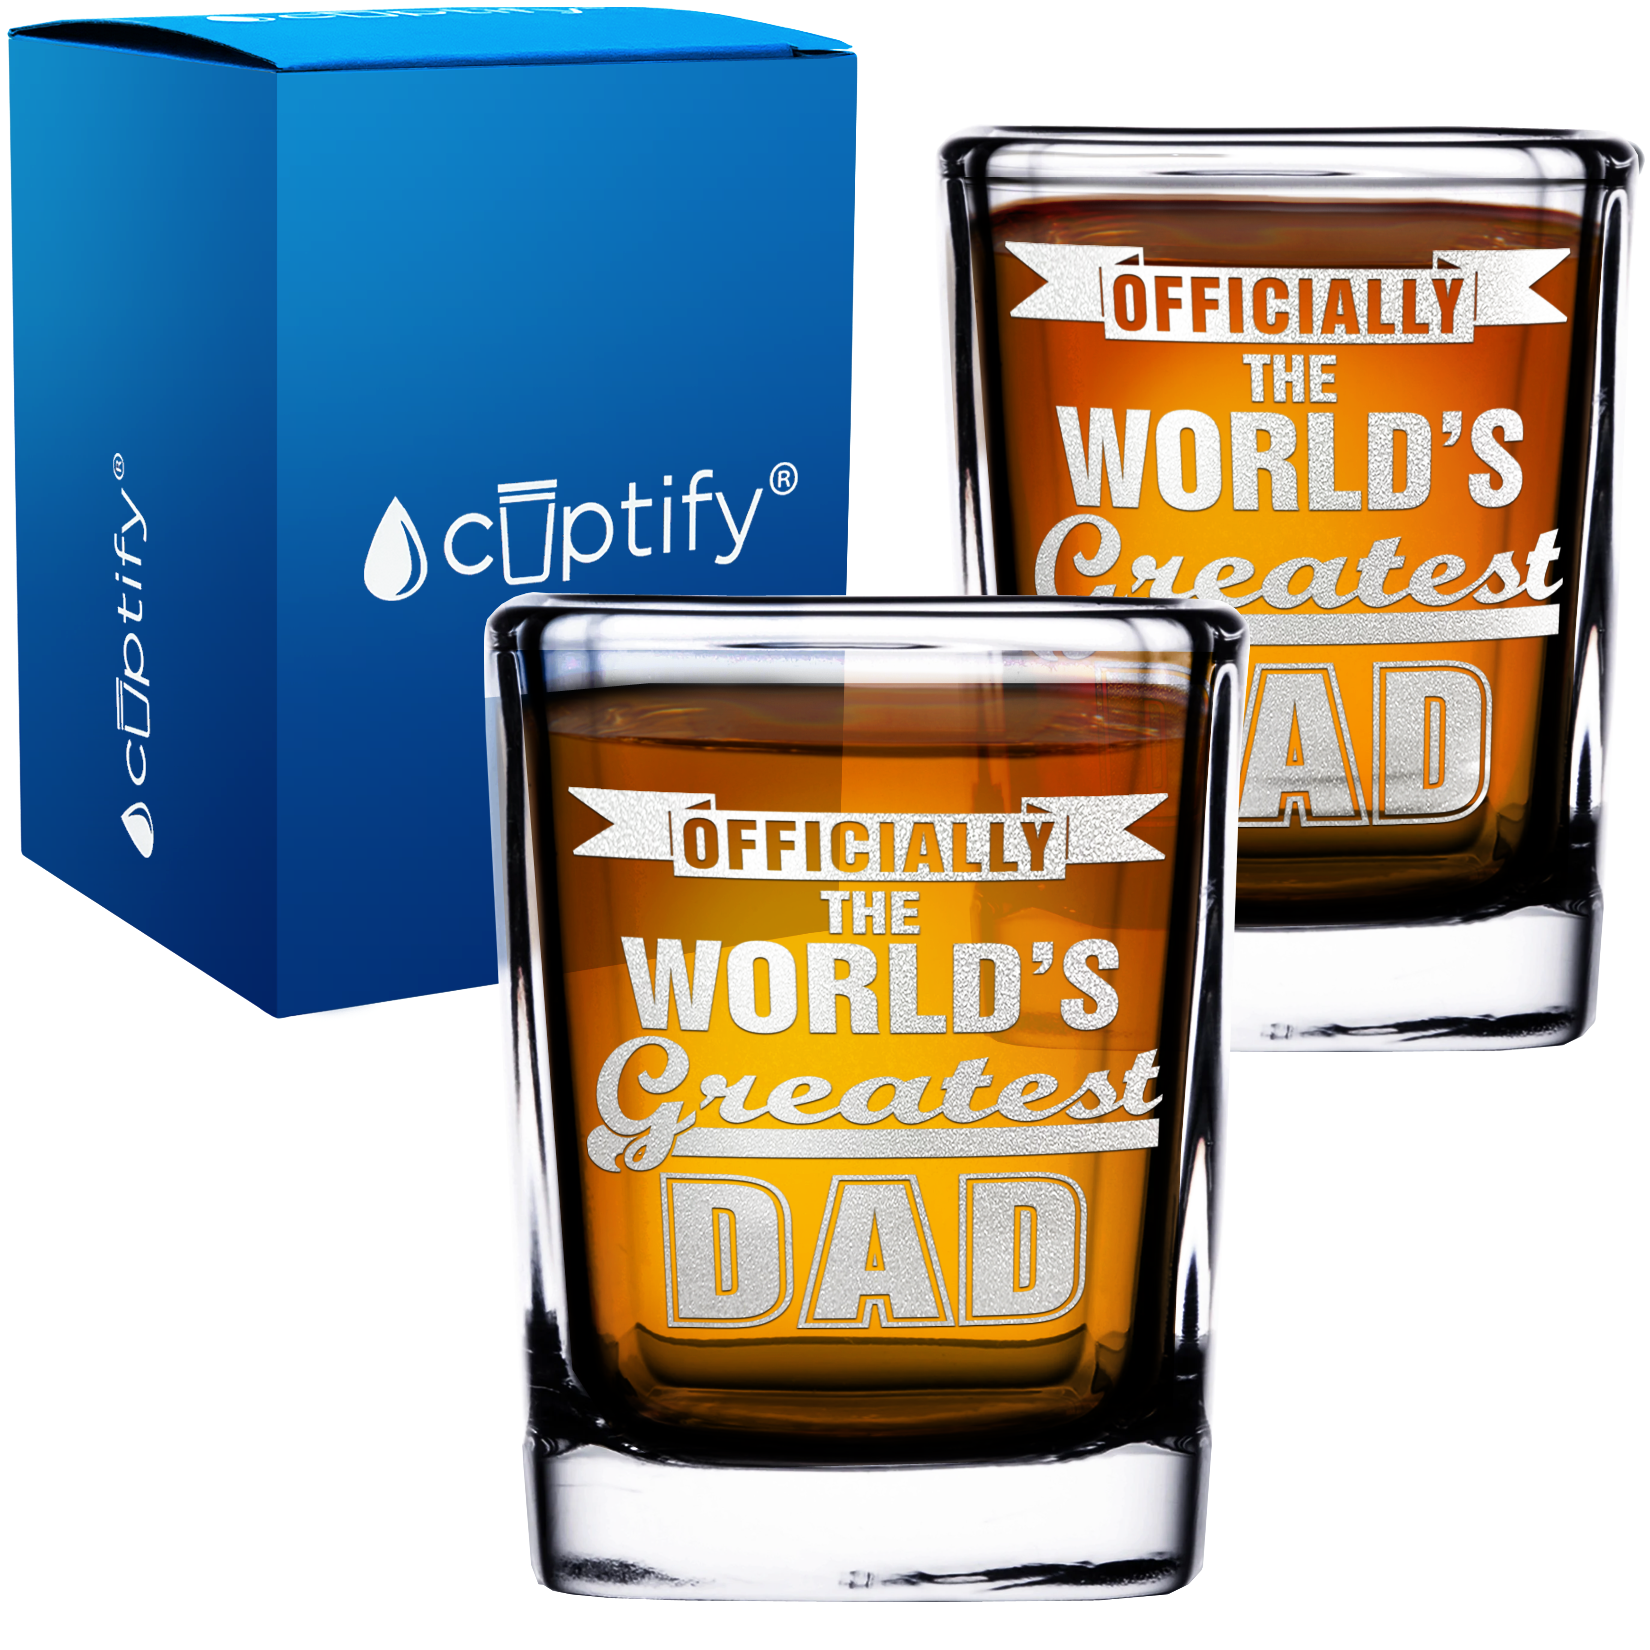 Officially The World's Greatest Dad 2oz Square Shot Glasses - Set of 2